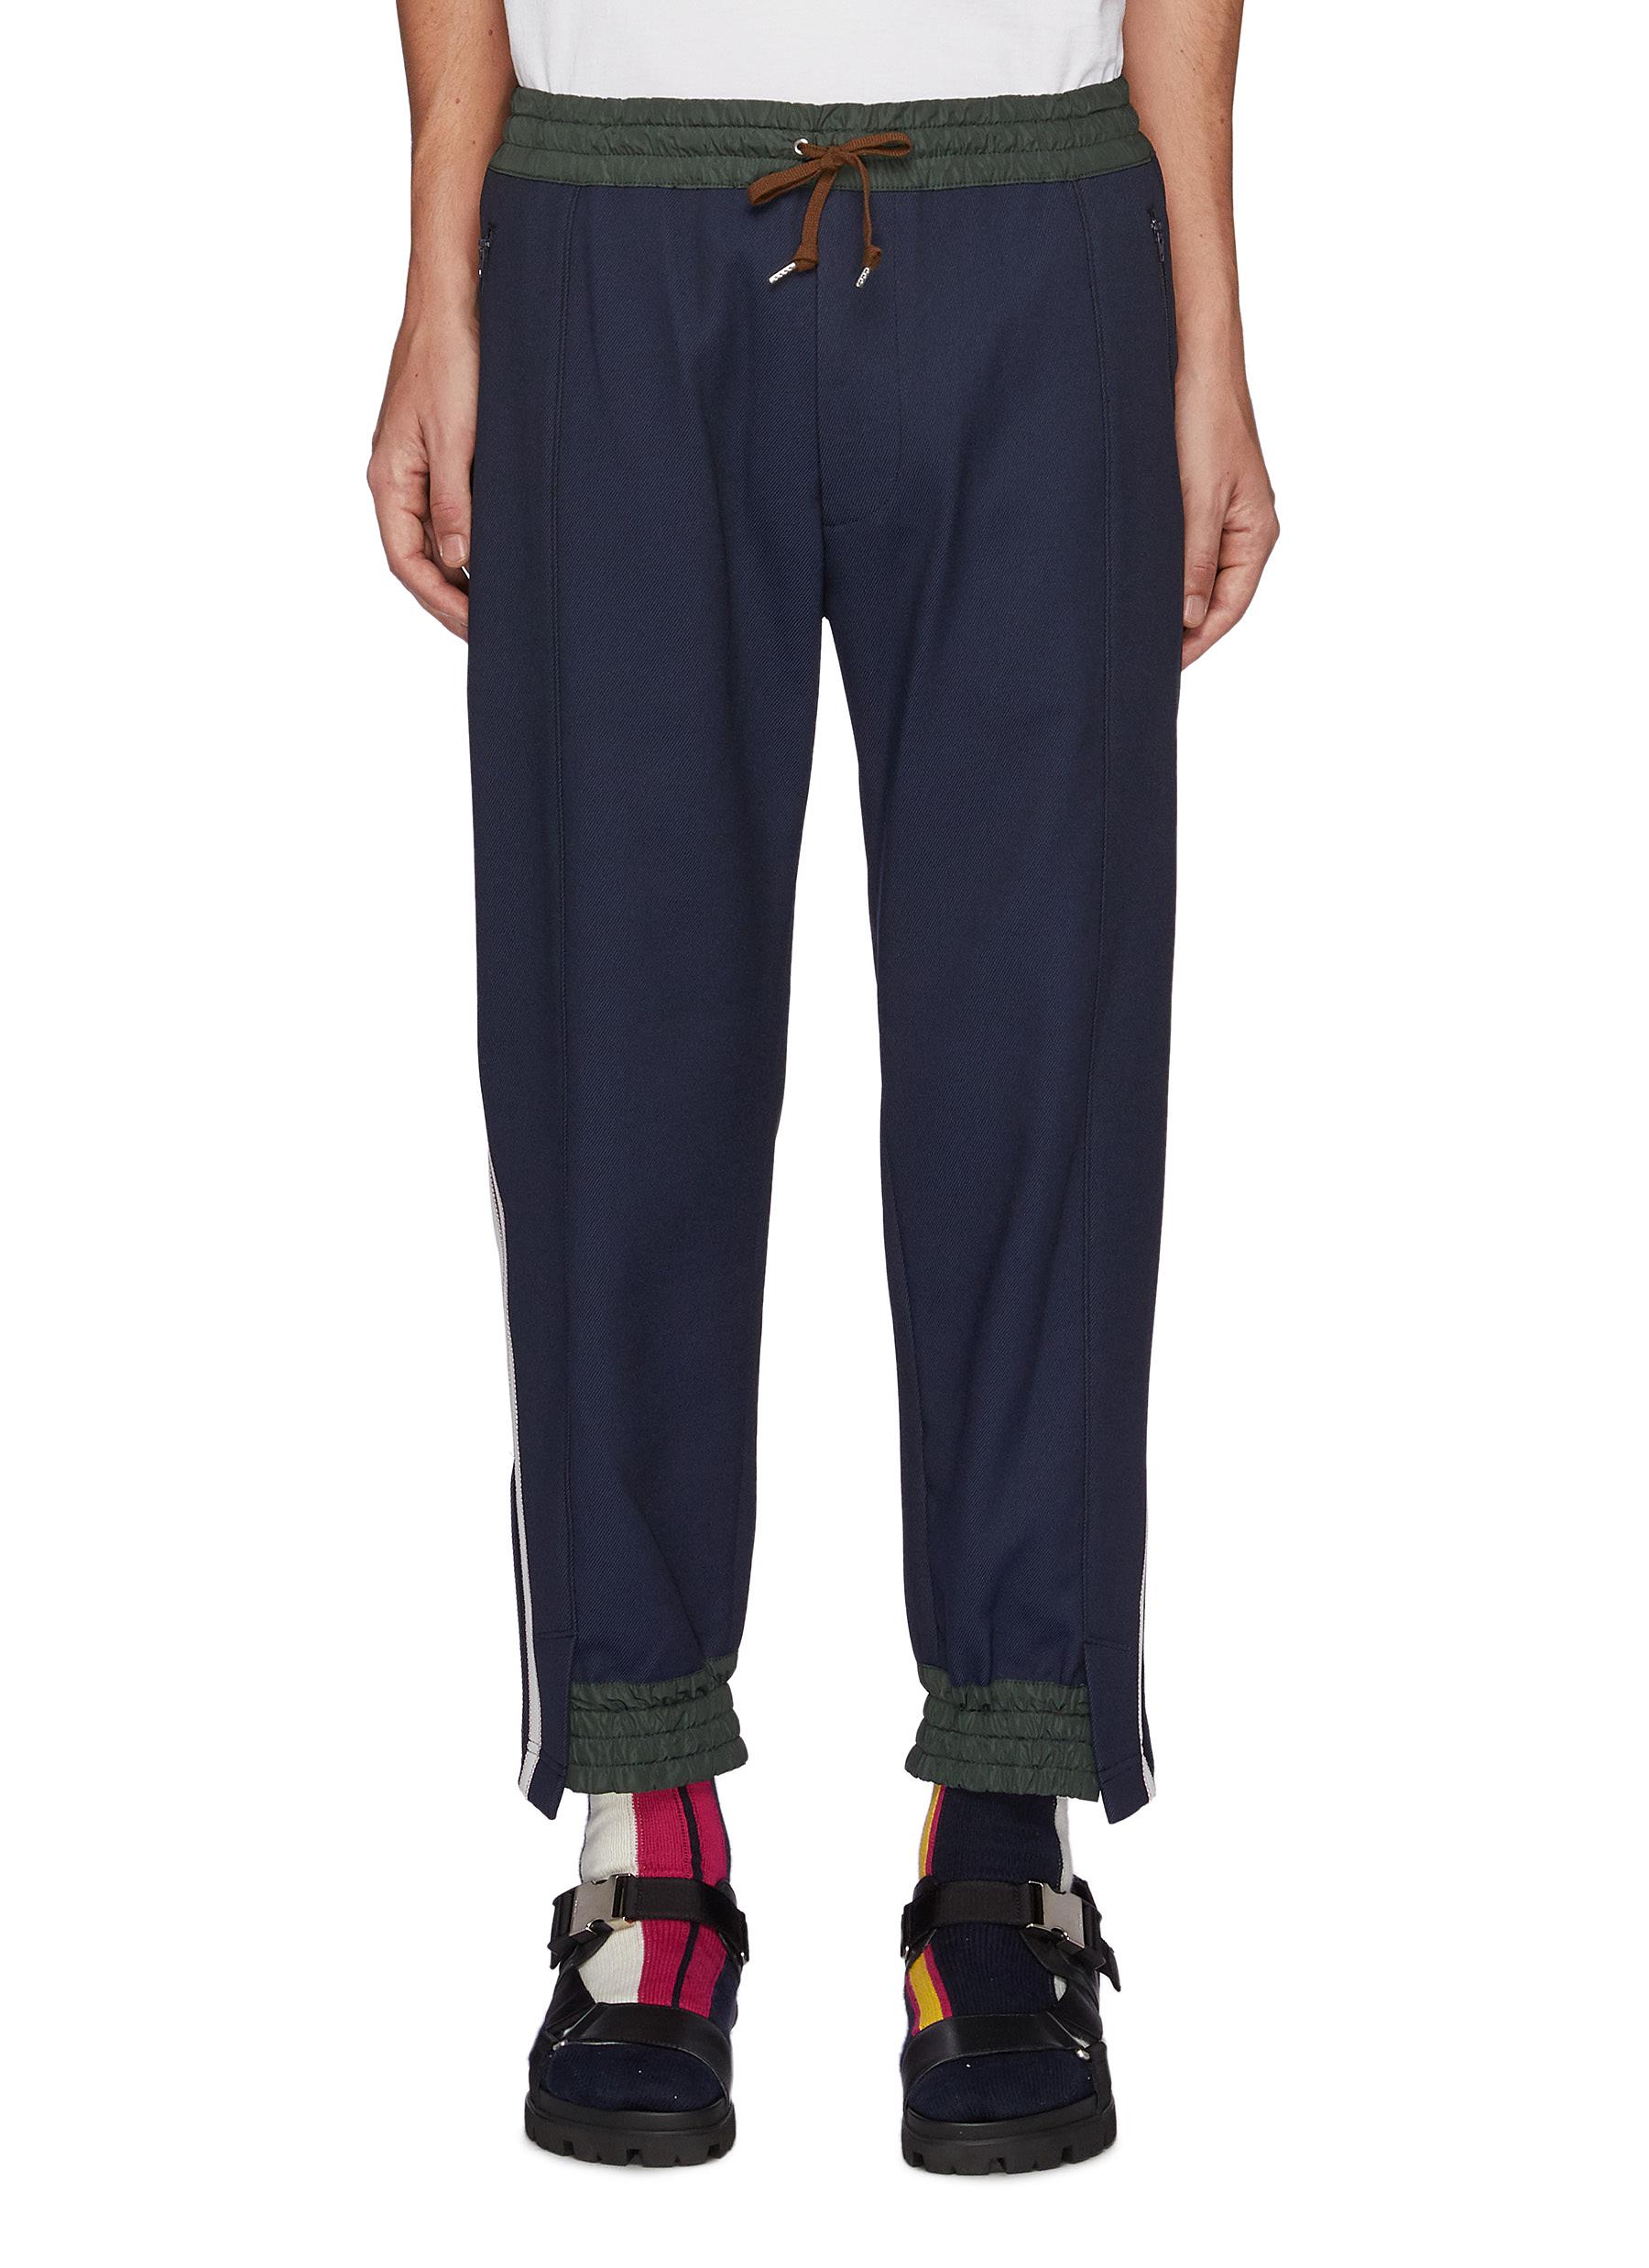 Deconstructed Side Striped Drawstring Jogger Pants